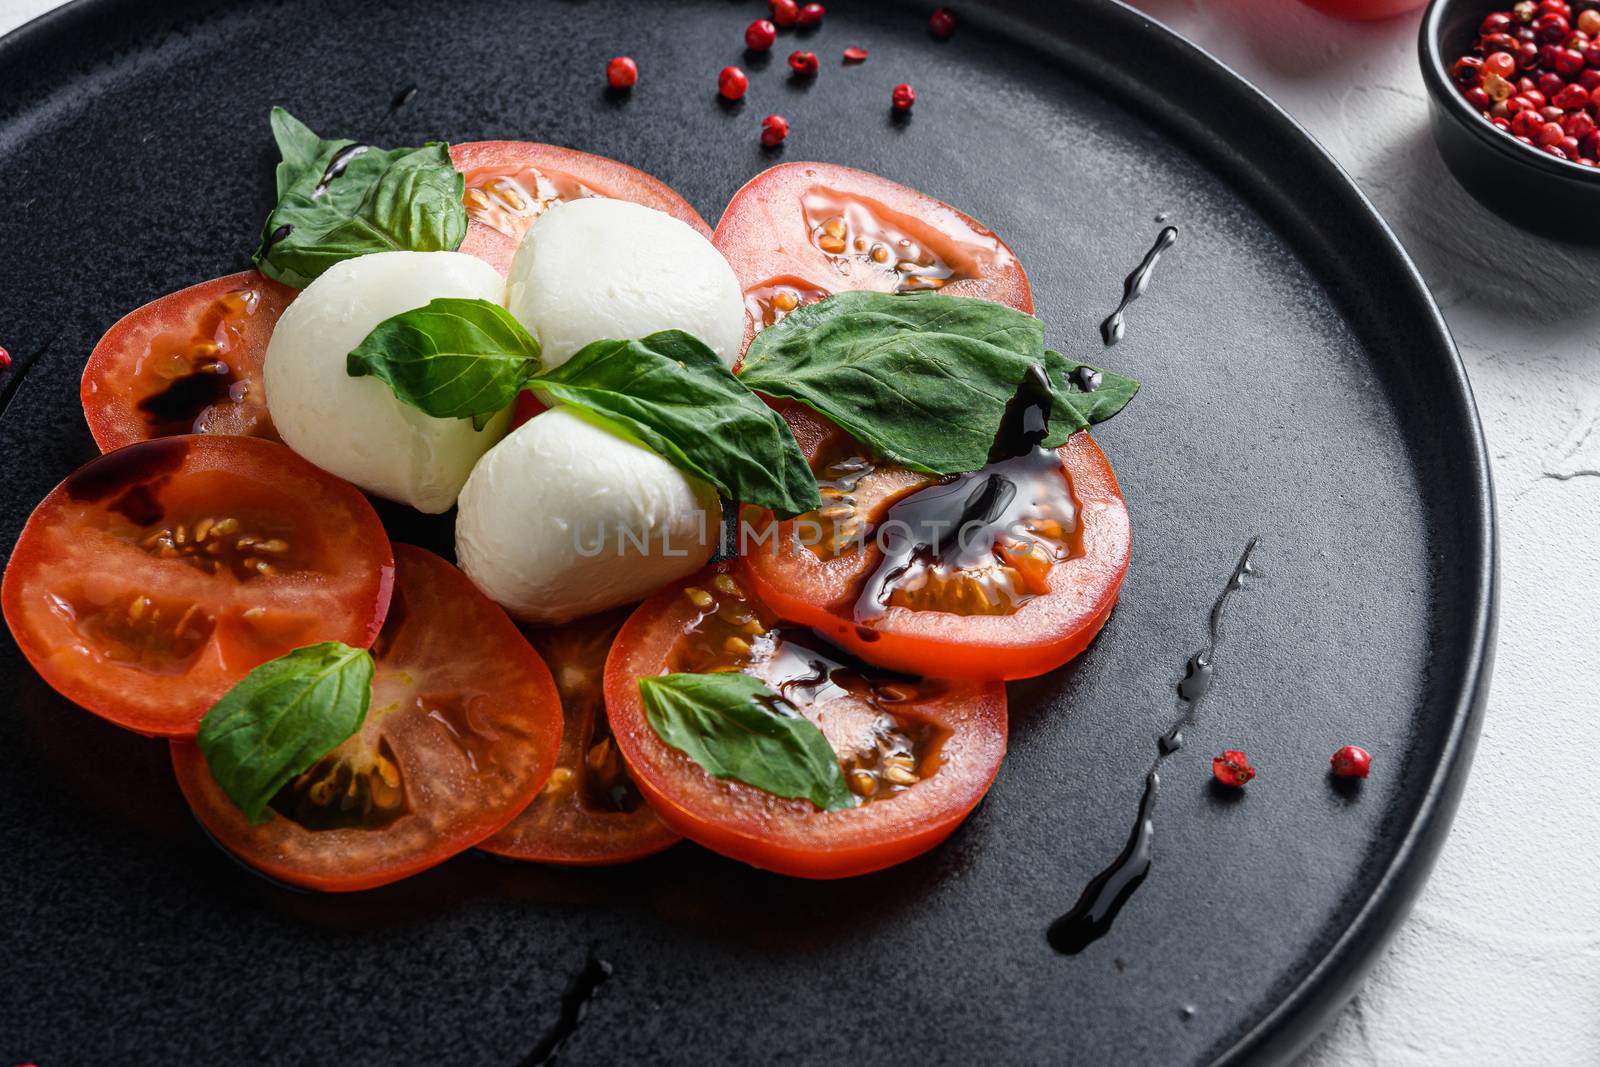 Caprese fresh italian salad with tomatoes, mozzarella, green basil on dark slate plate over white background close up selective focus.